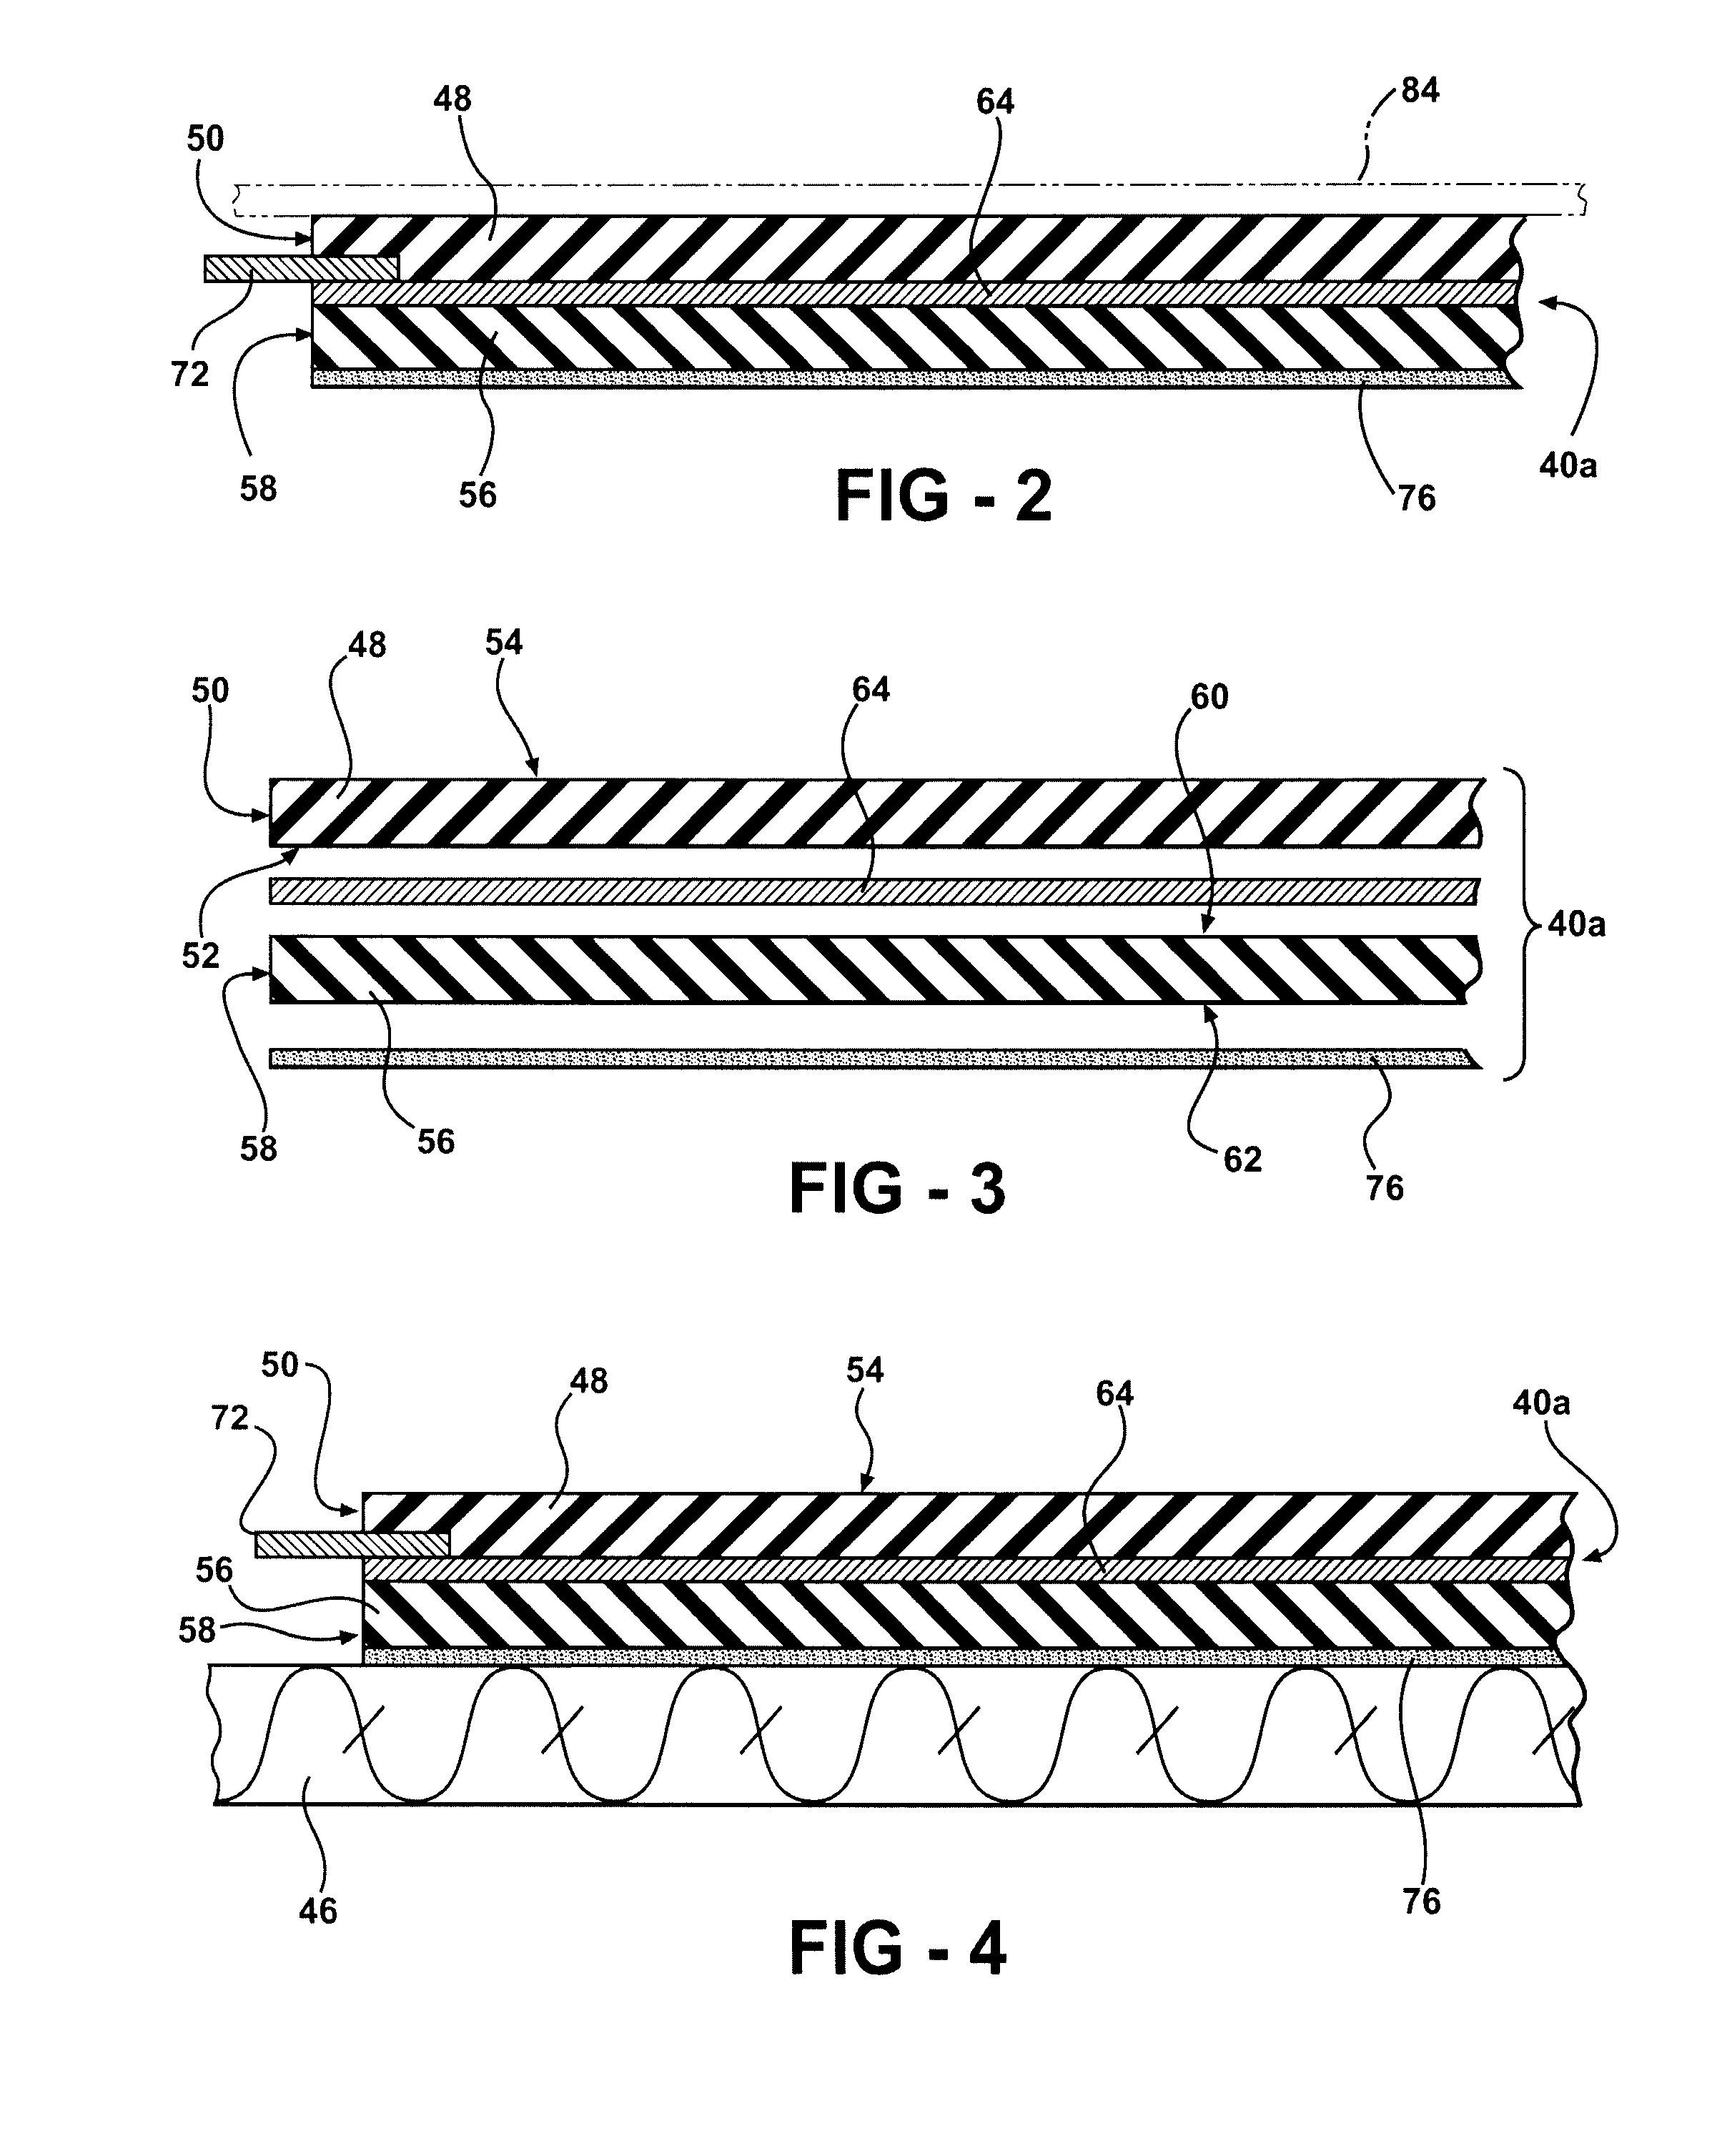 Composite heating element with an integrated switch